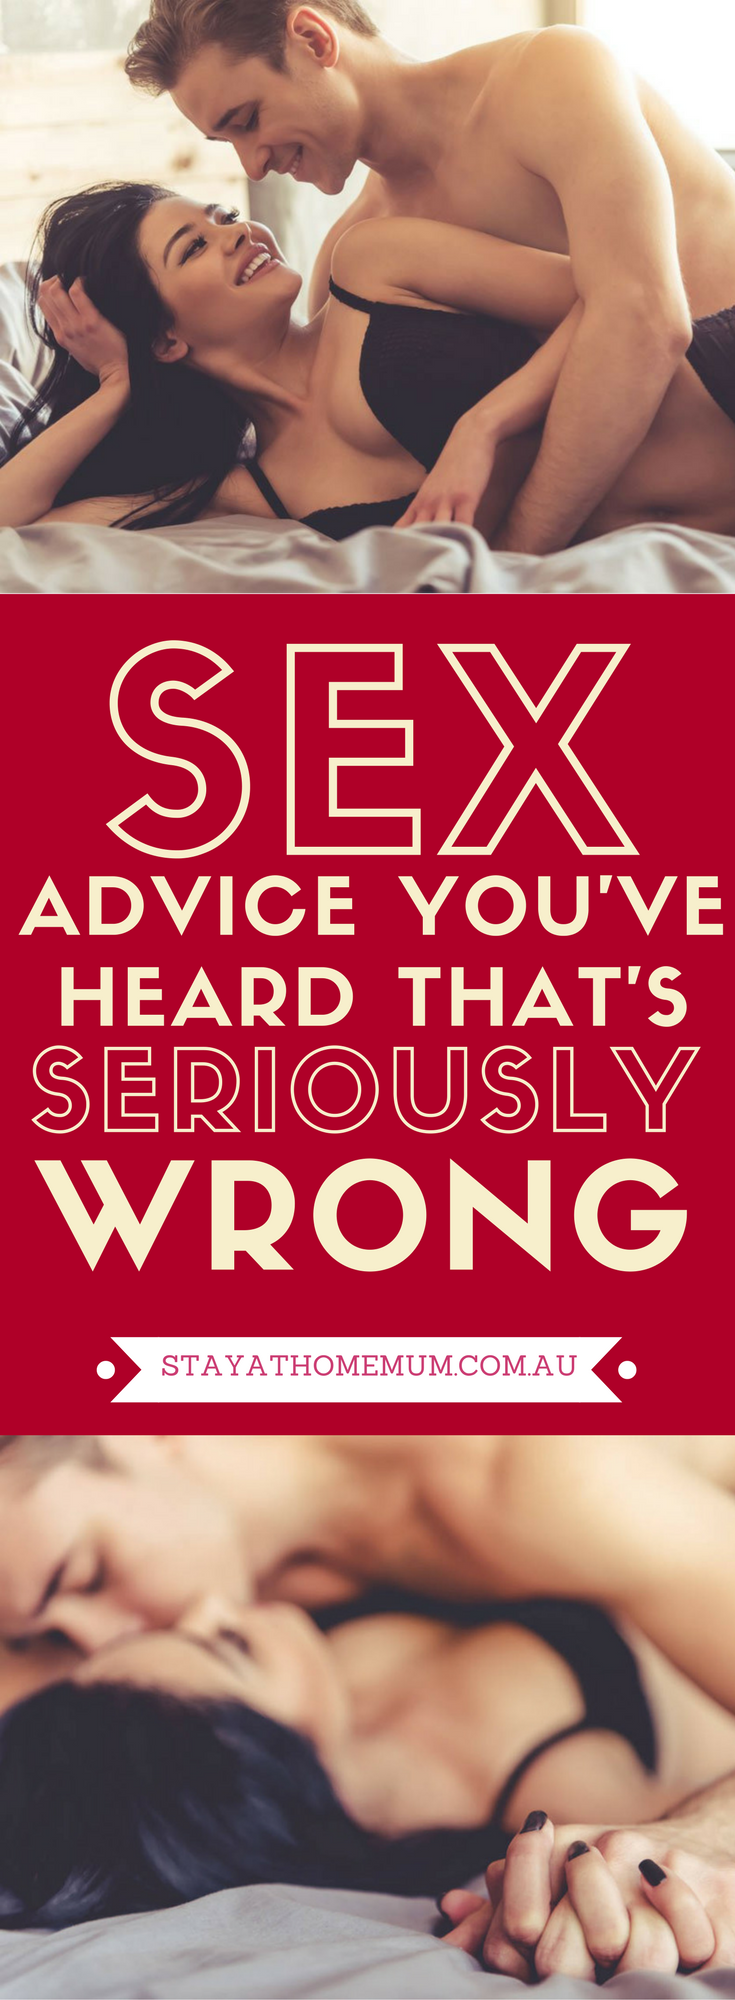 Sex Advice You've Heard That's SERIOUSLY Wrong